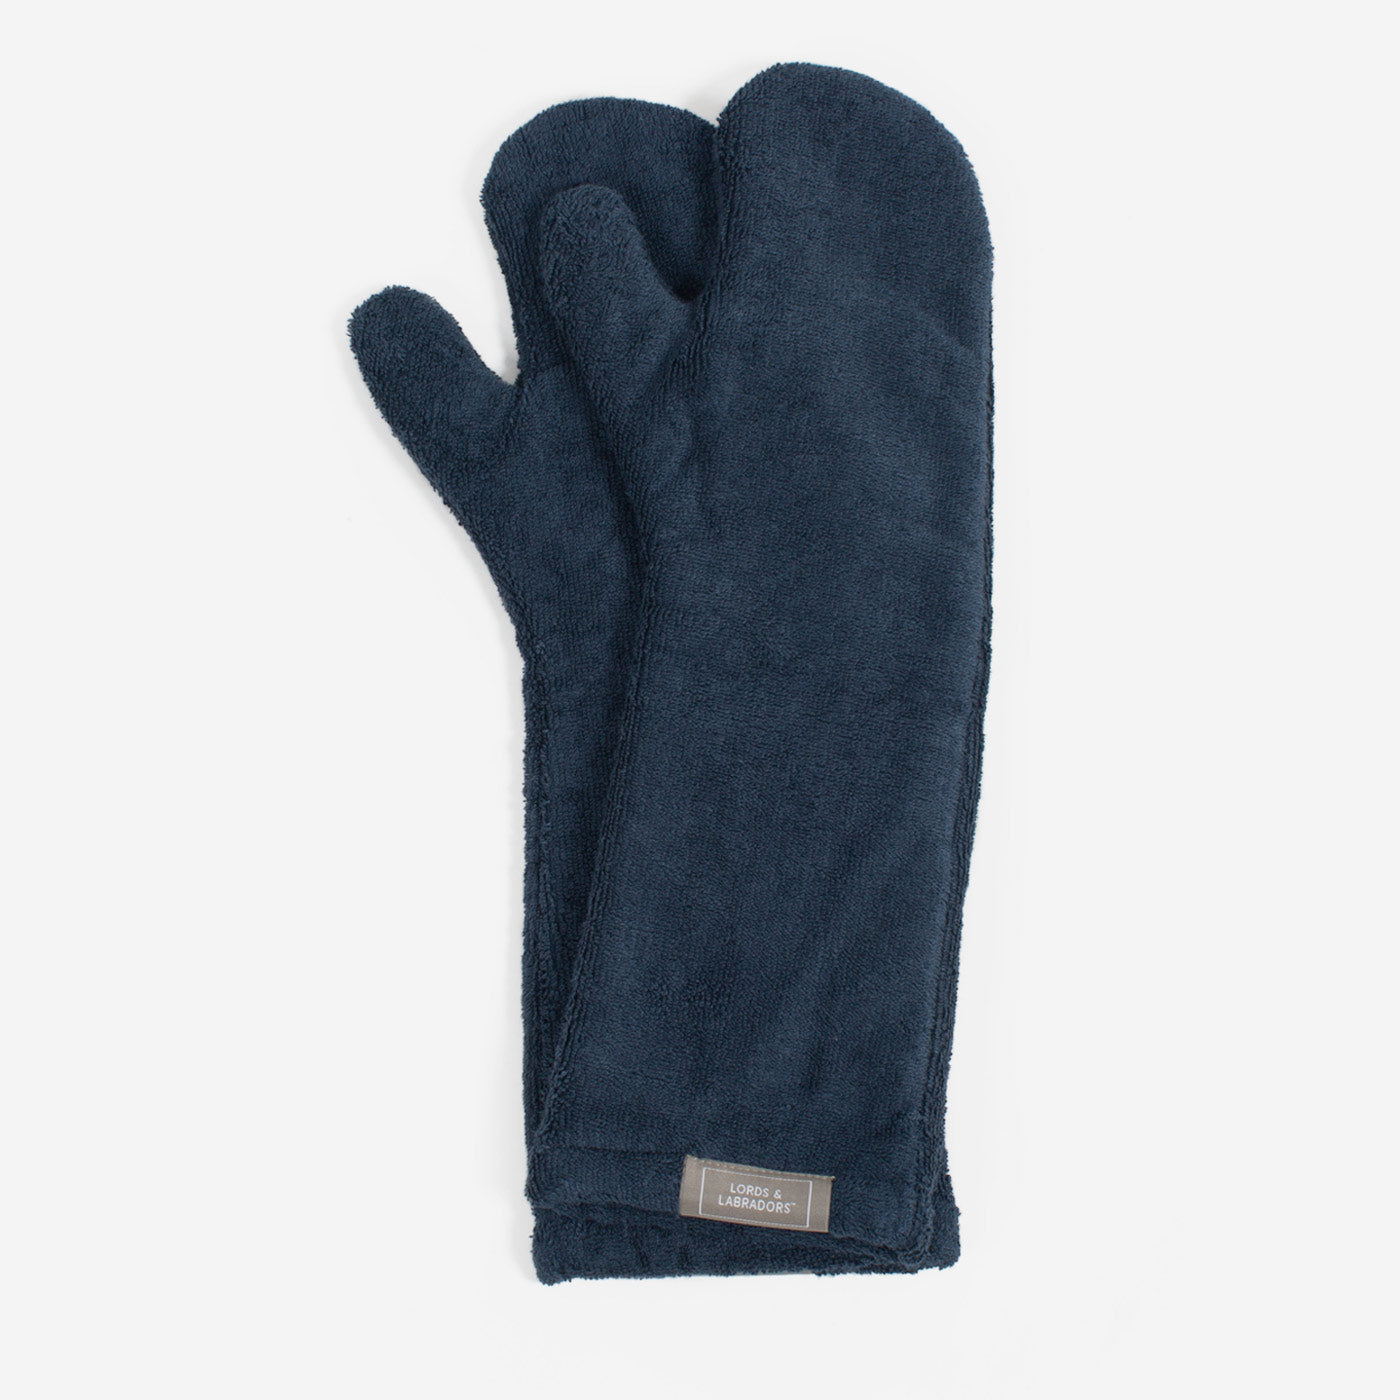 Introducing the ultimate bamboo dog drying mitts in beautiful Navy, made from luxurious bamboo to aid sensitive skin featuring universal size to fit all with super absorbent material for easy pet drying! The perfect dog drying gloves, available now at Lords & Labradors US, In four colors!